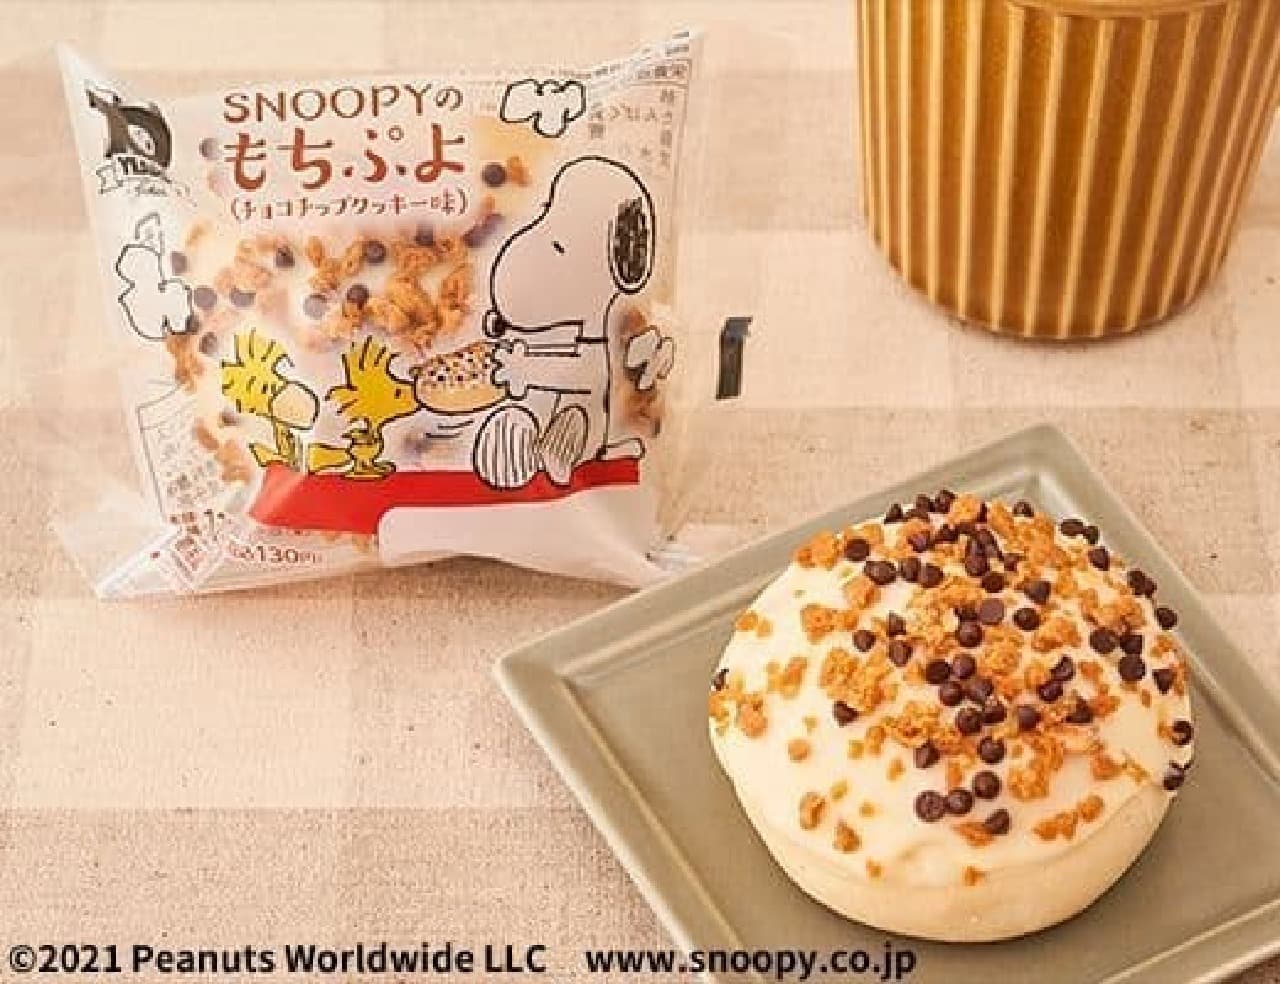 Lawson Snoopy Product Summary Snoopy Mochipuyo Chocolate Chip Cookie Flavor Eat Trout Snoopy Entabe